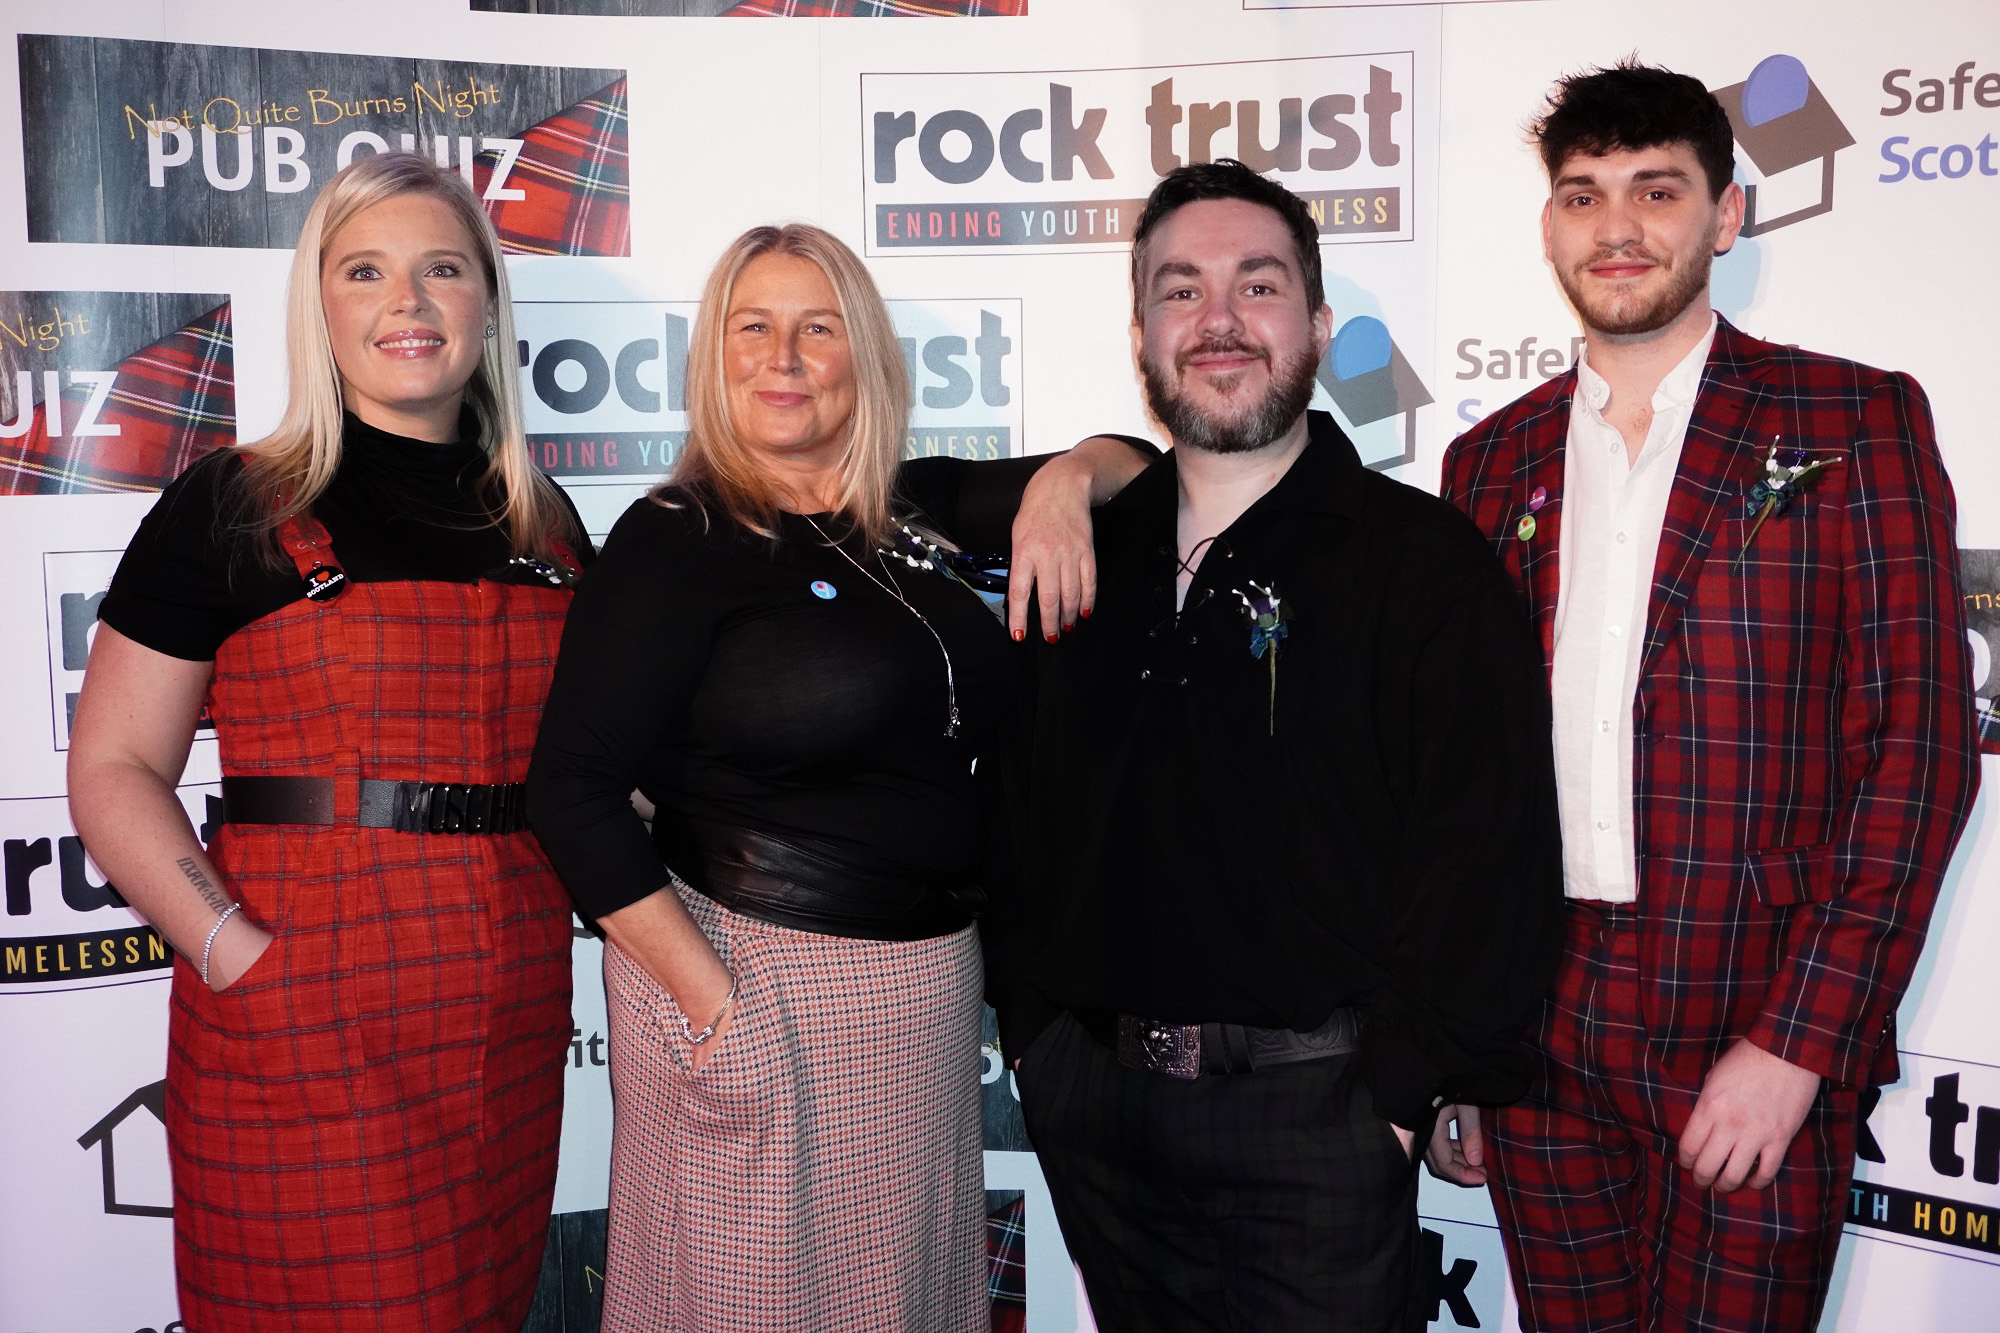 SafeDeposits Scotland presents quiz funds to the Rock Trust